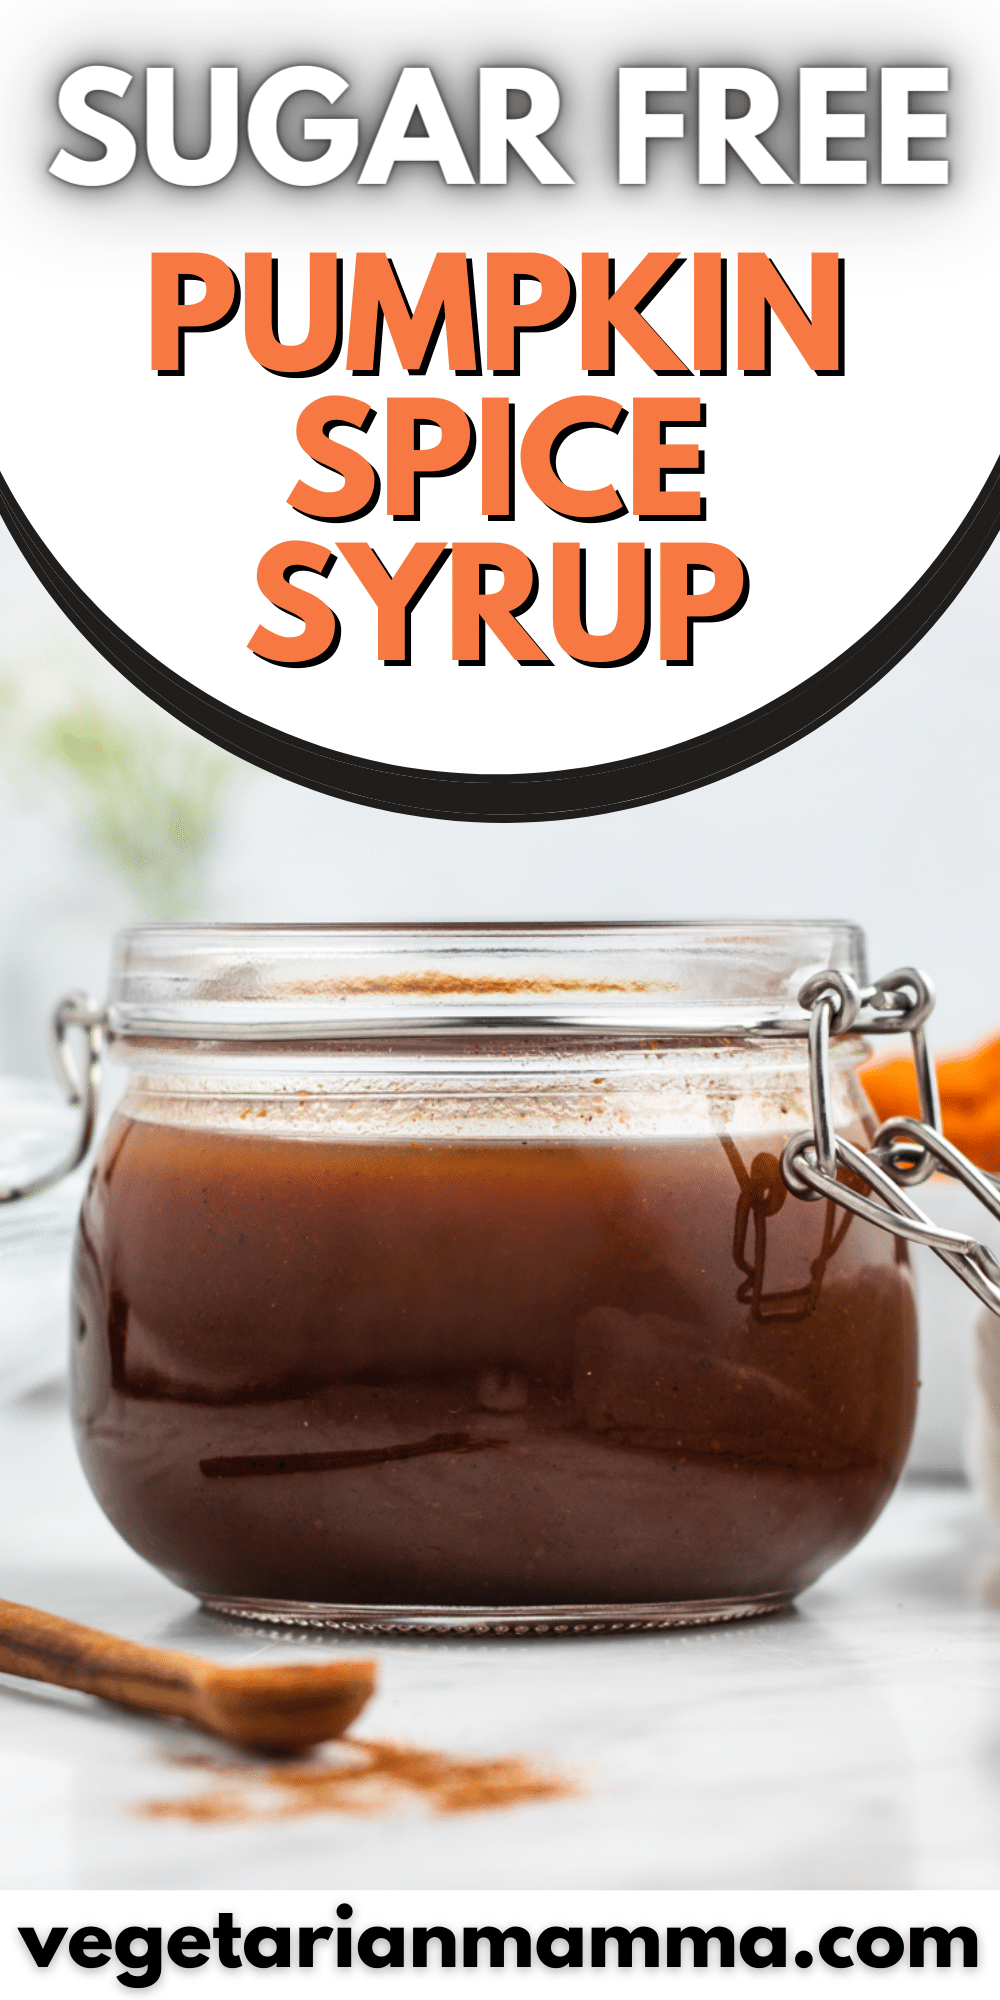 This Sugar Free Pumpkin Spice Syrup is a delicious way to make your favorite coffeehouse drinks at home, with less time, money and effort! | simply syrup | Pumpkin syrup | sugar free